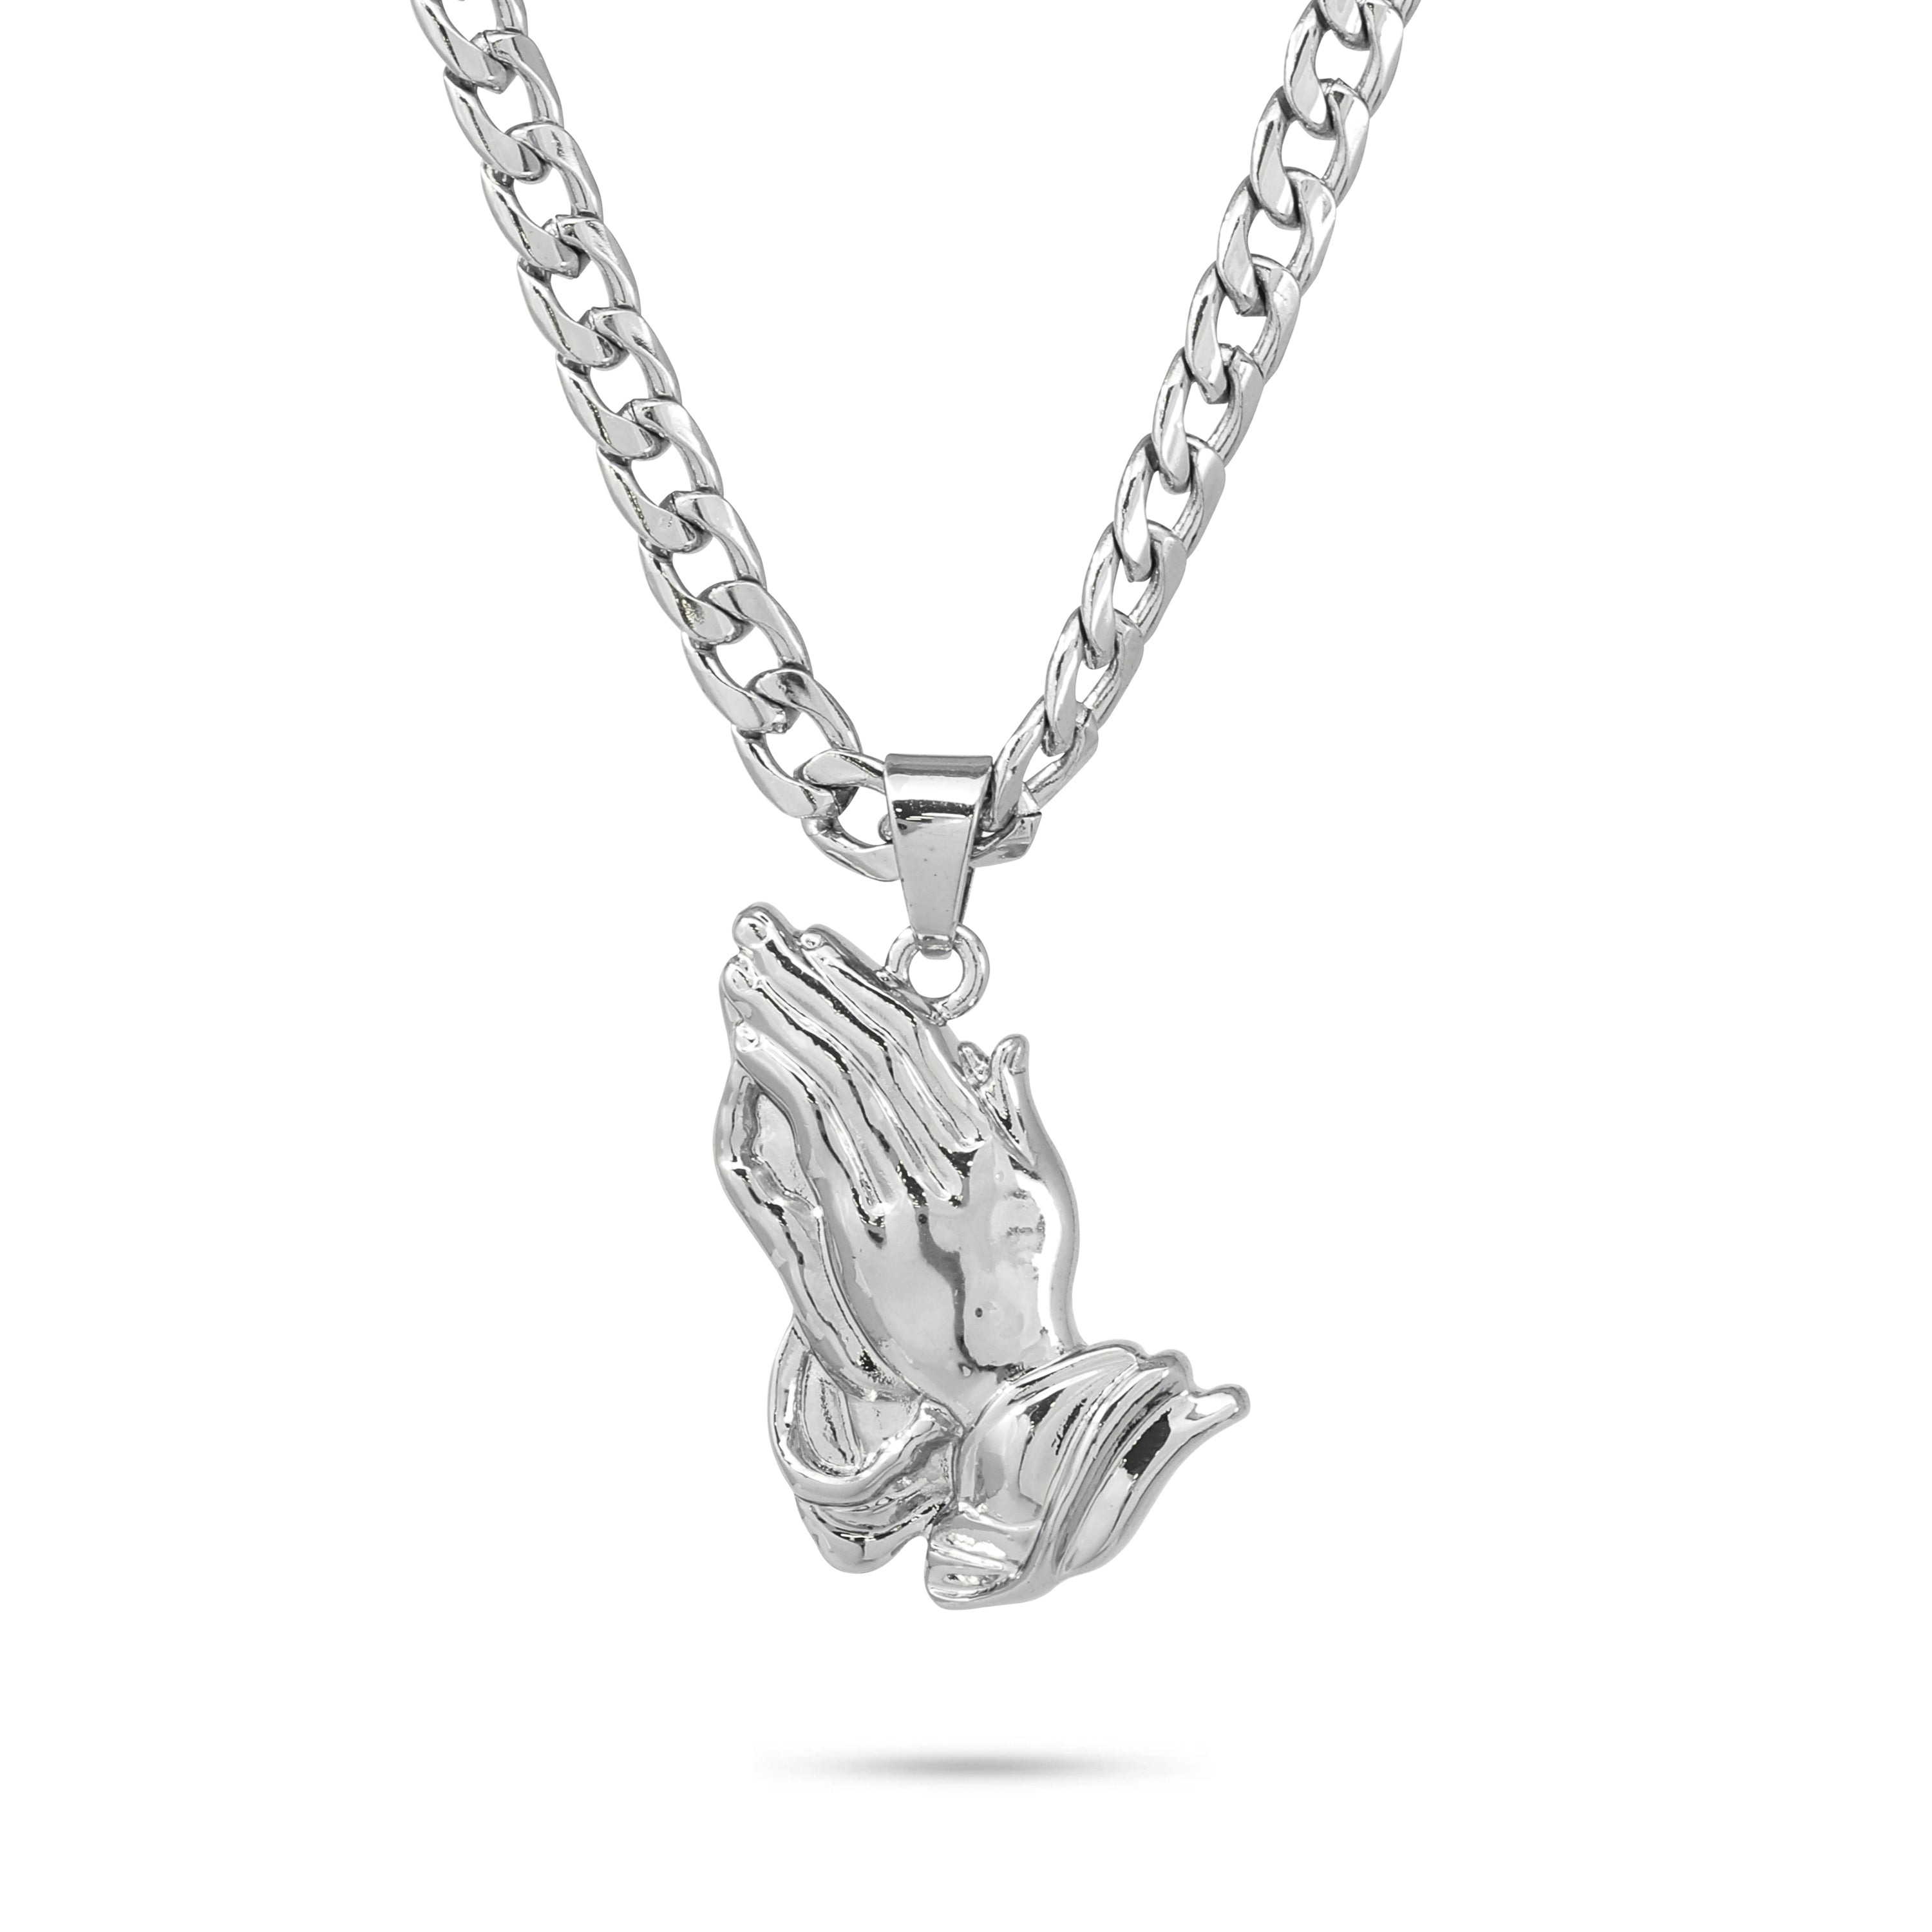 PRAYING HAND NECKLACE SILVER